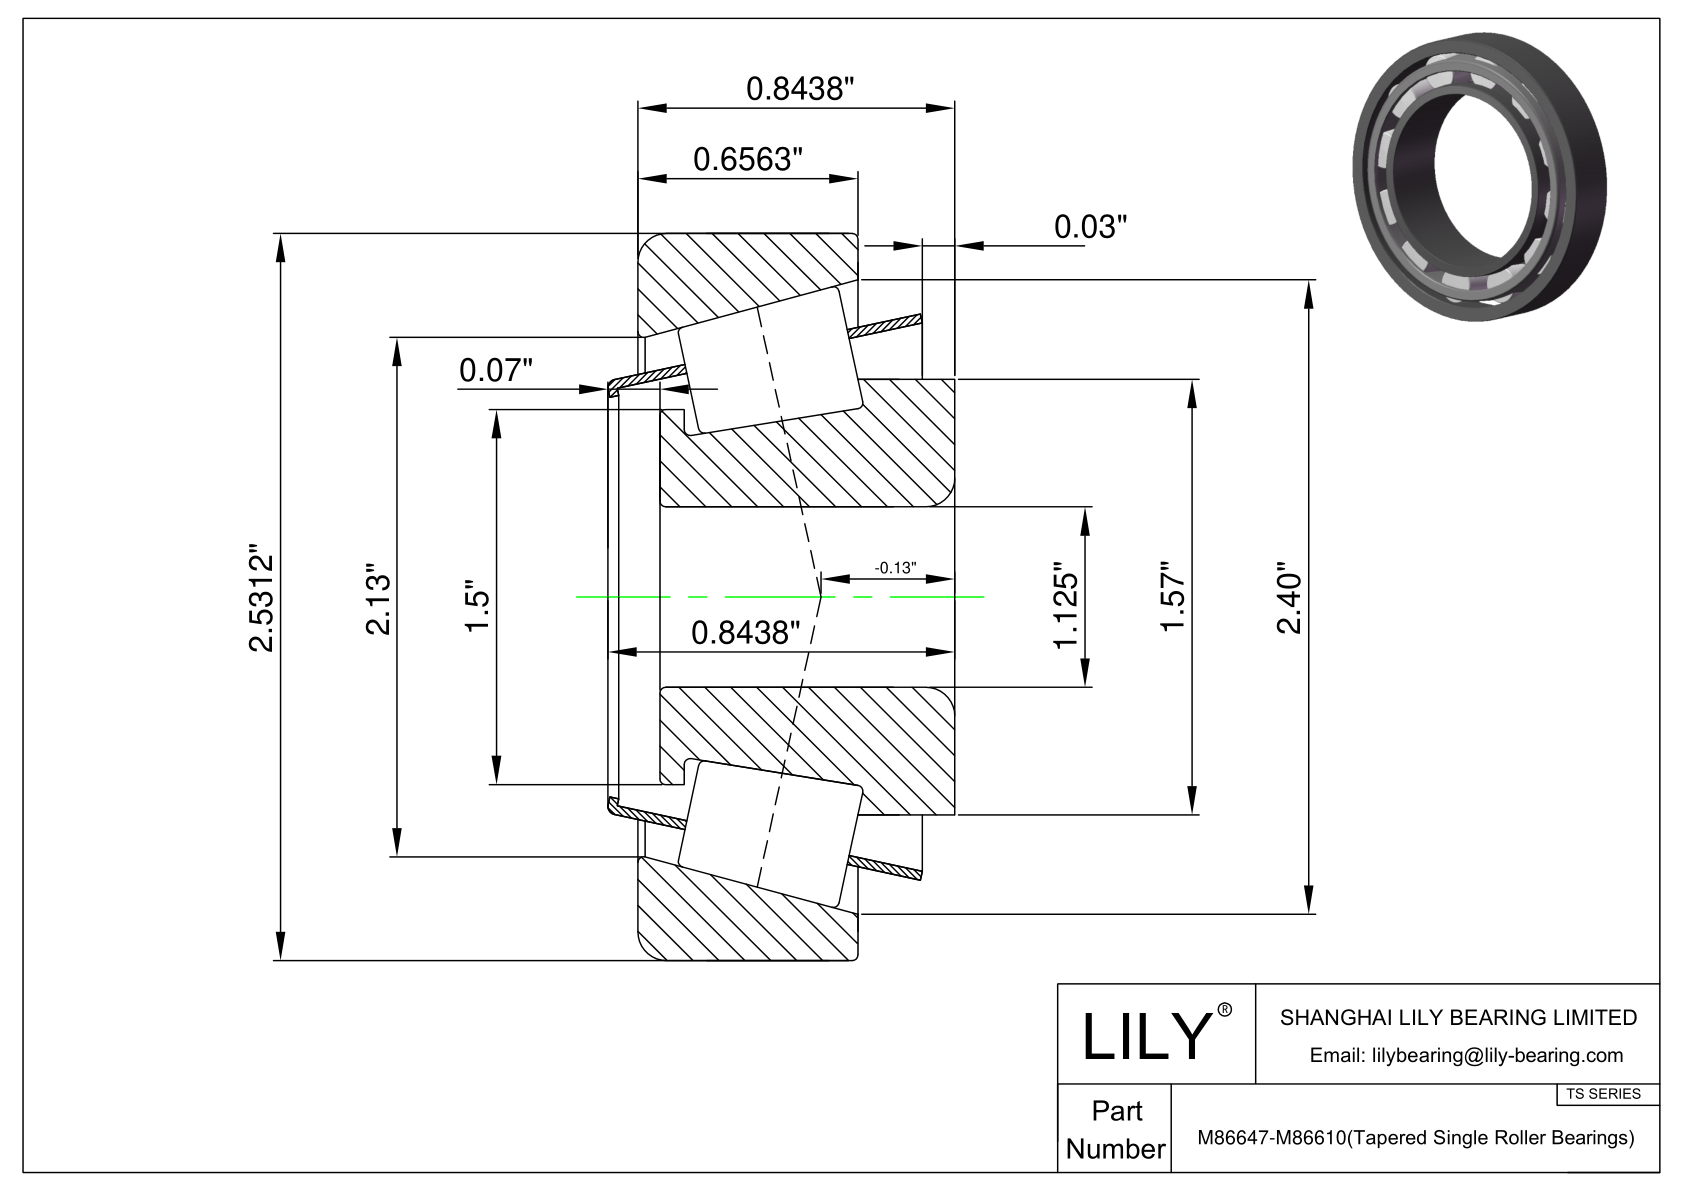 M86647-M86610 TS (Tapered Single Roller Bearings) (Imperial) cad drawing